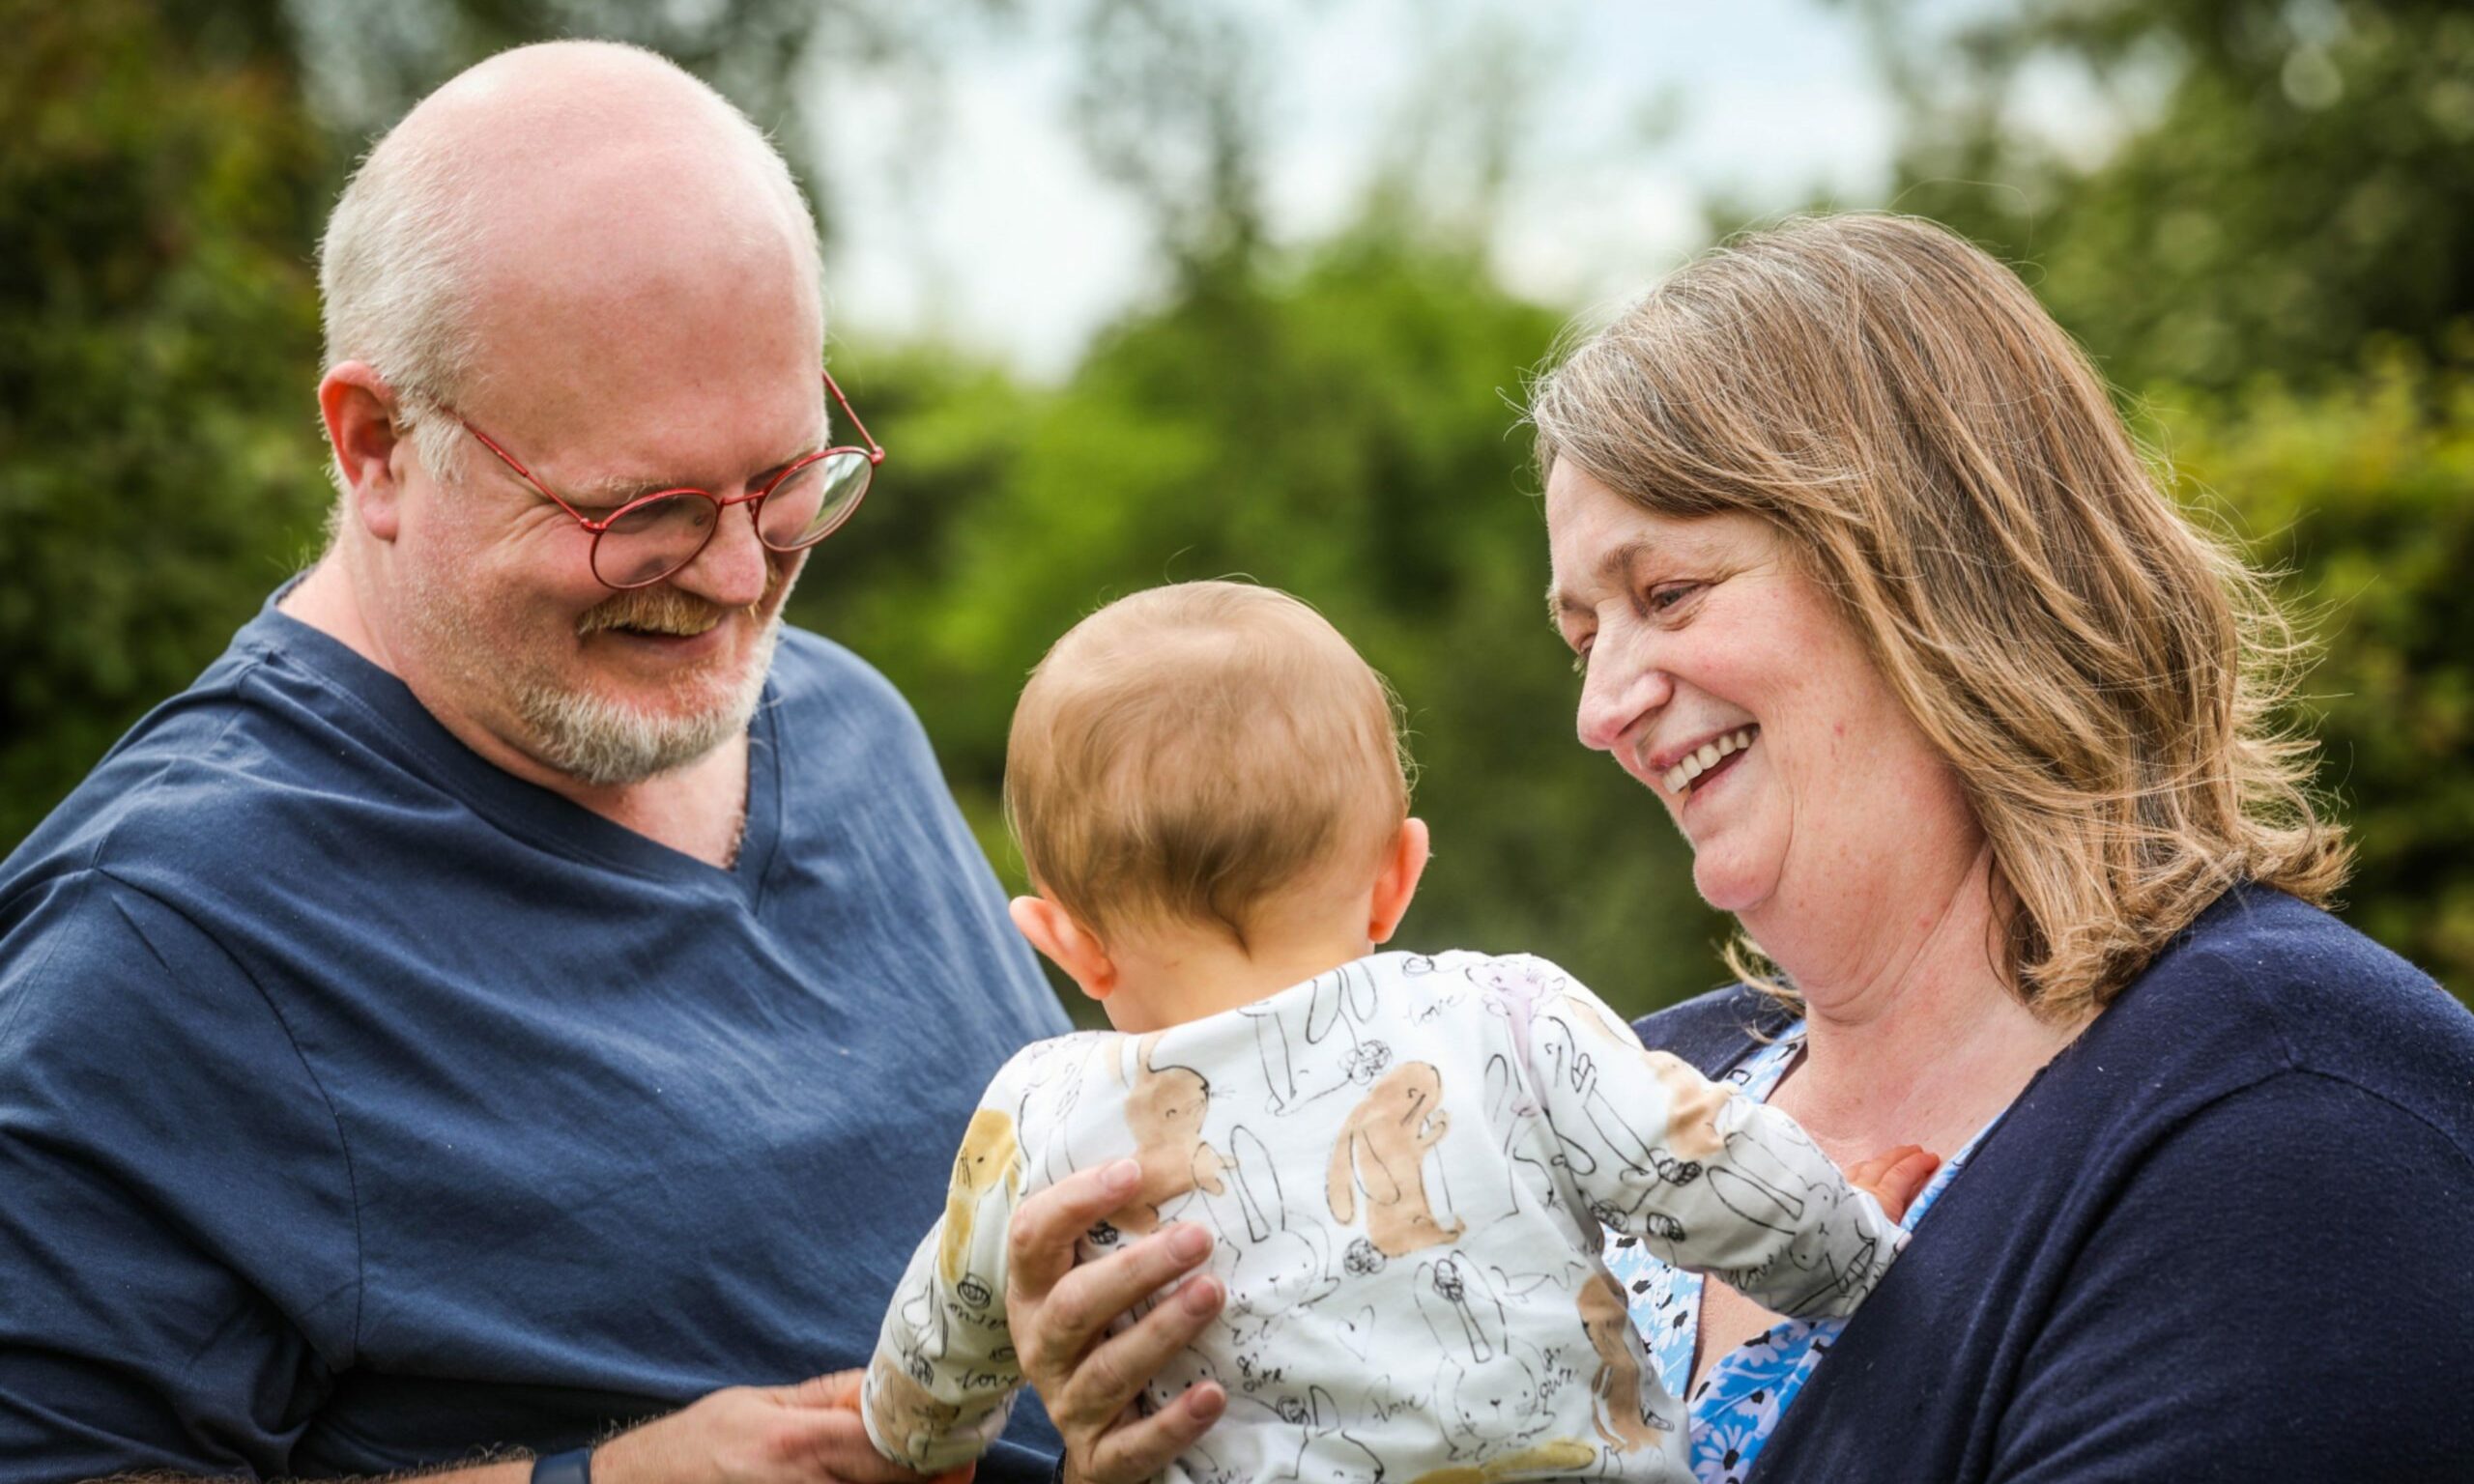 Two foster carers, a man and a woman, holding a baby and smiling